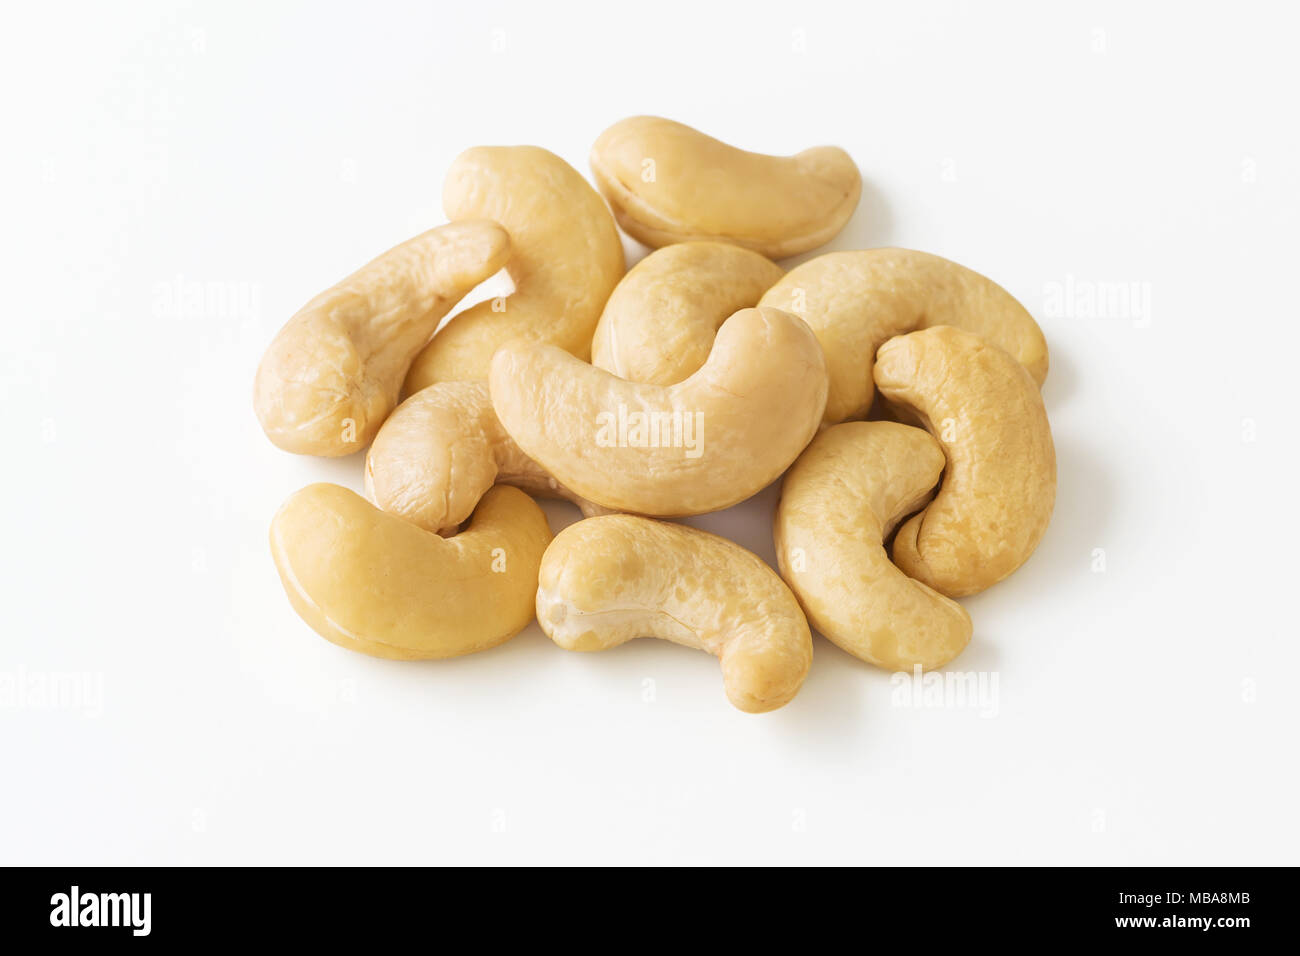 Raw cashew nuts closed up on white background Stock Photo